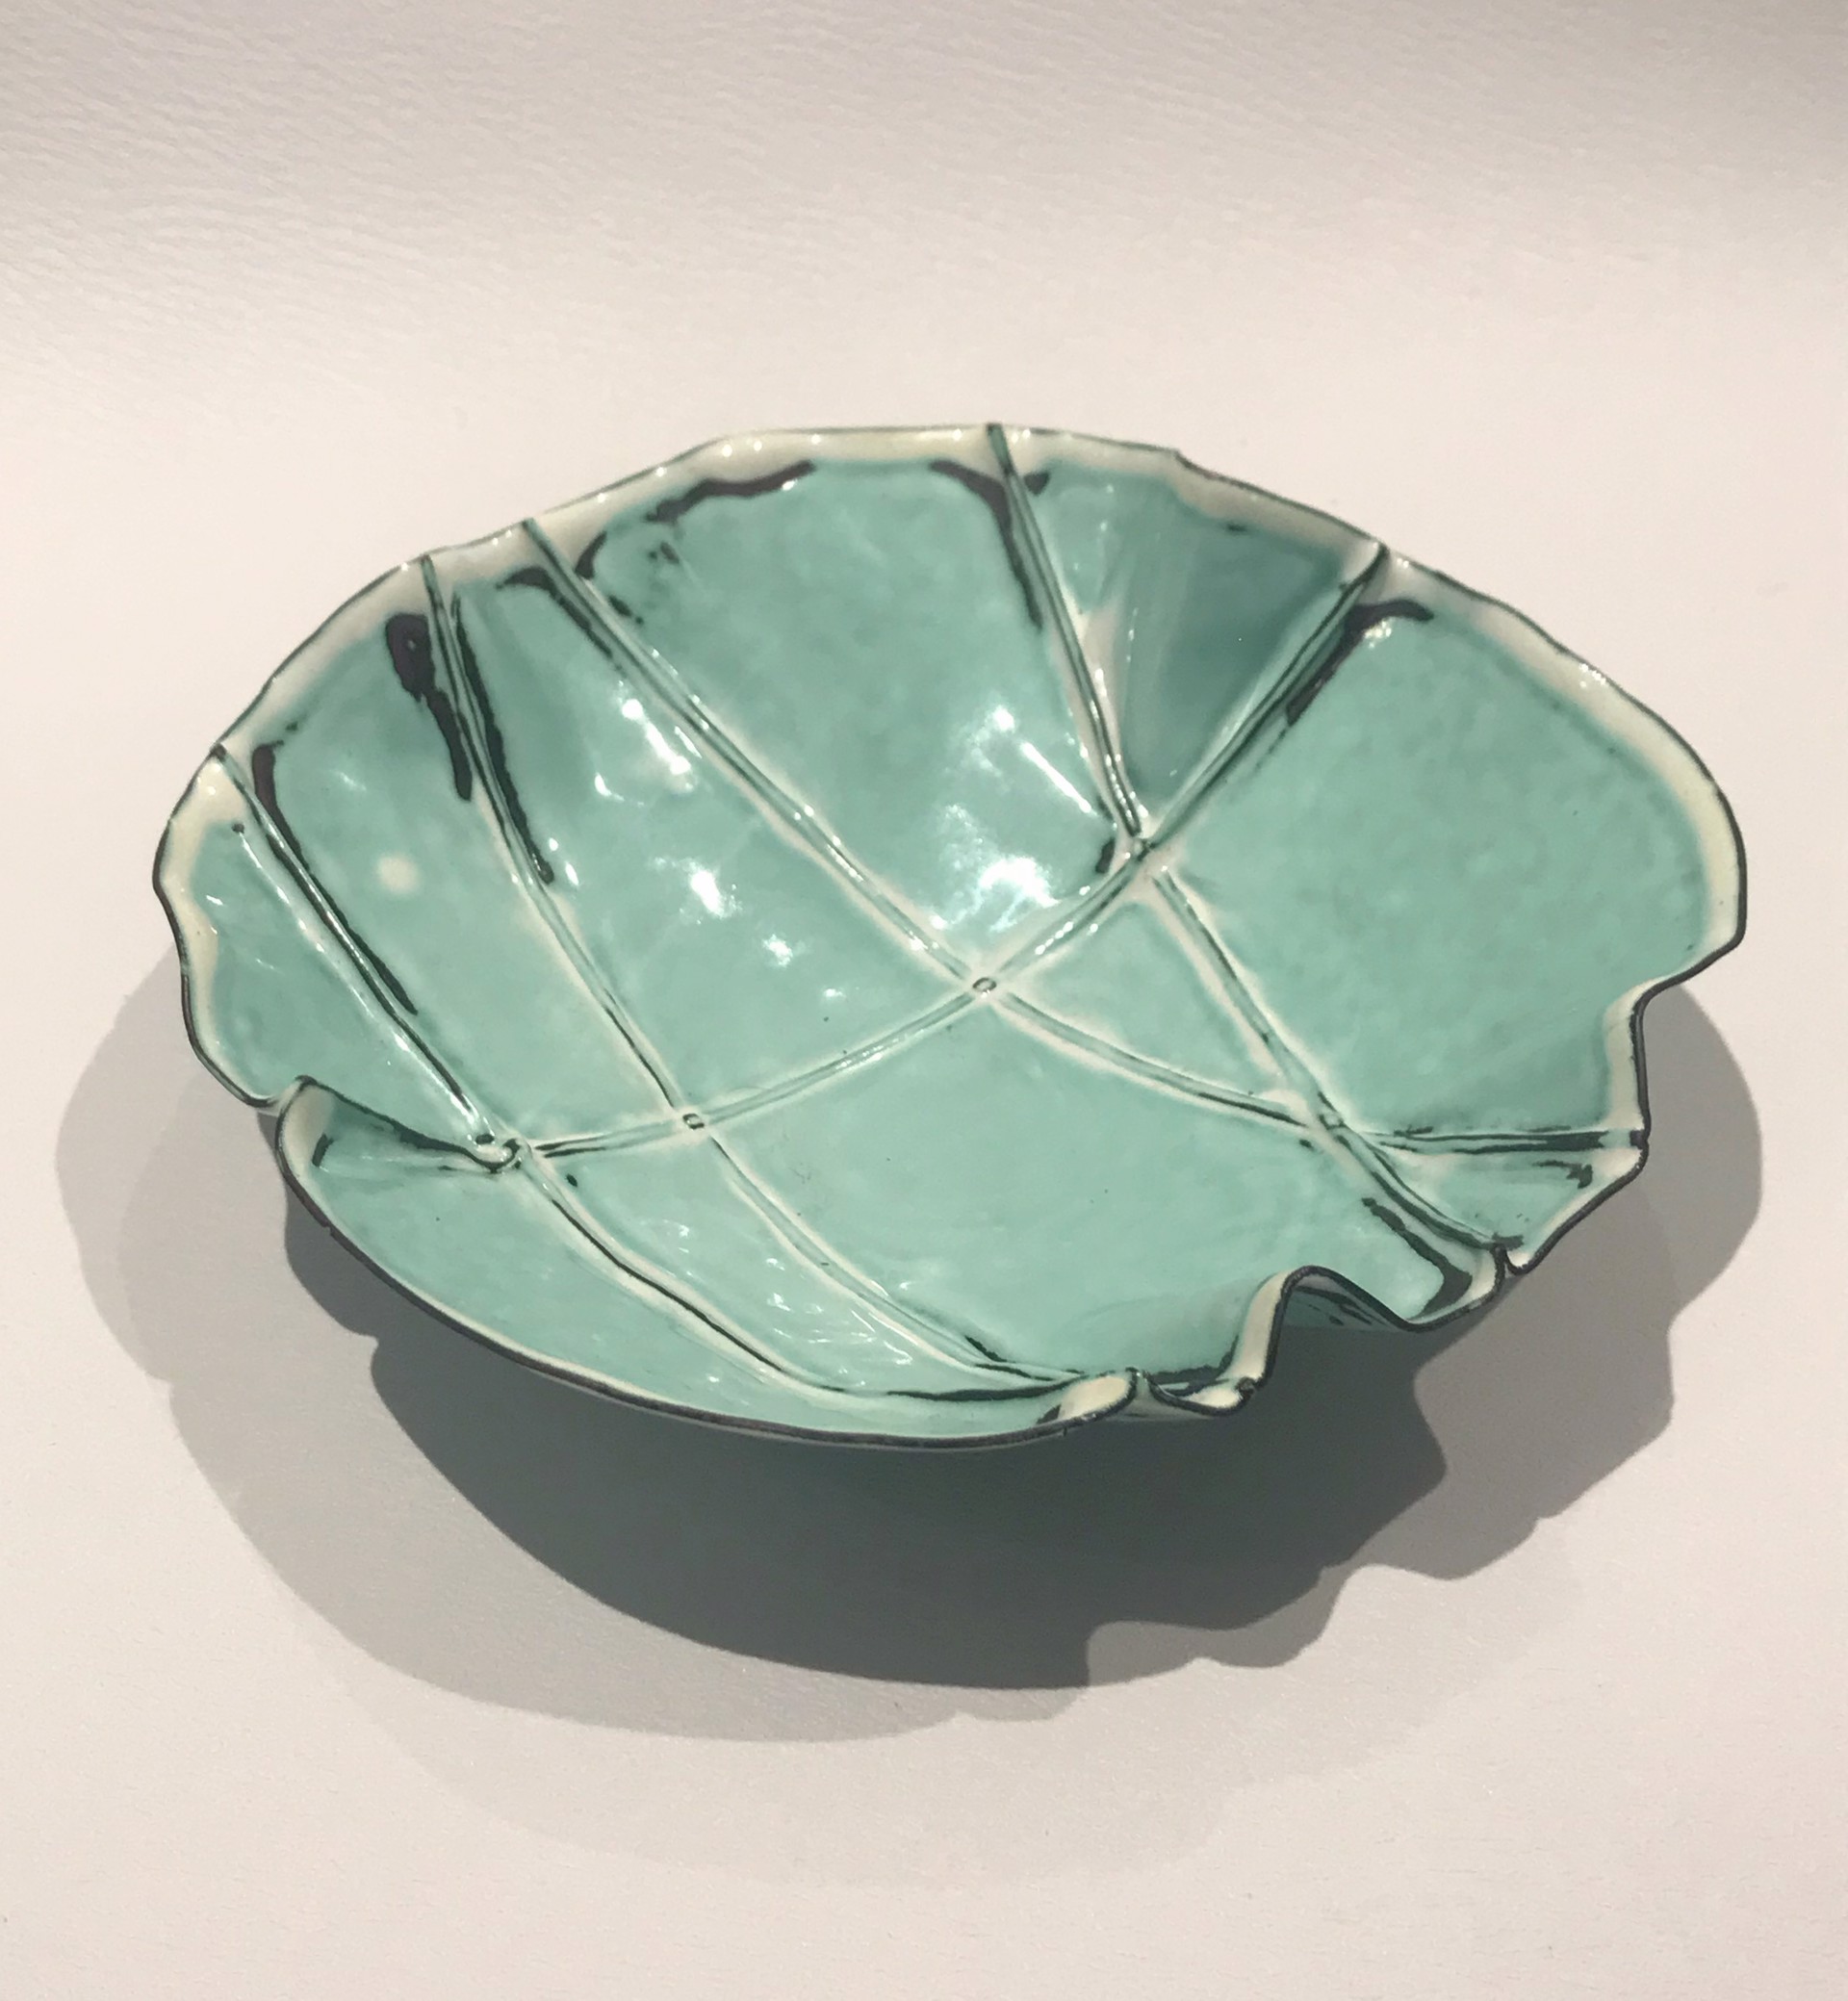 Enameled Bowl with Folds by Nicole Josette